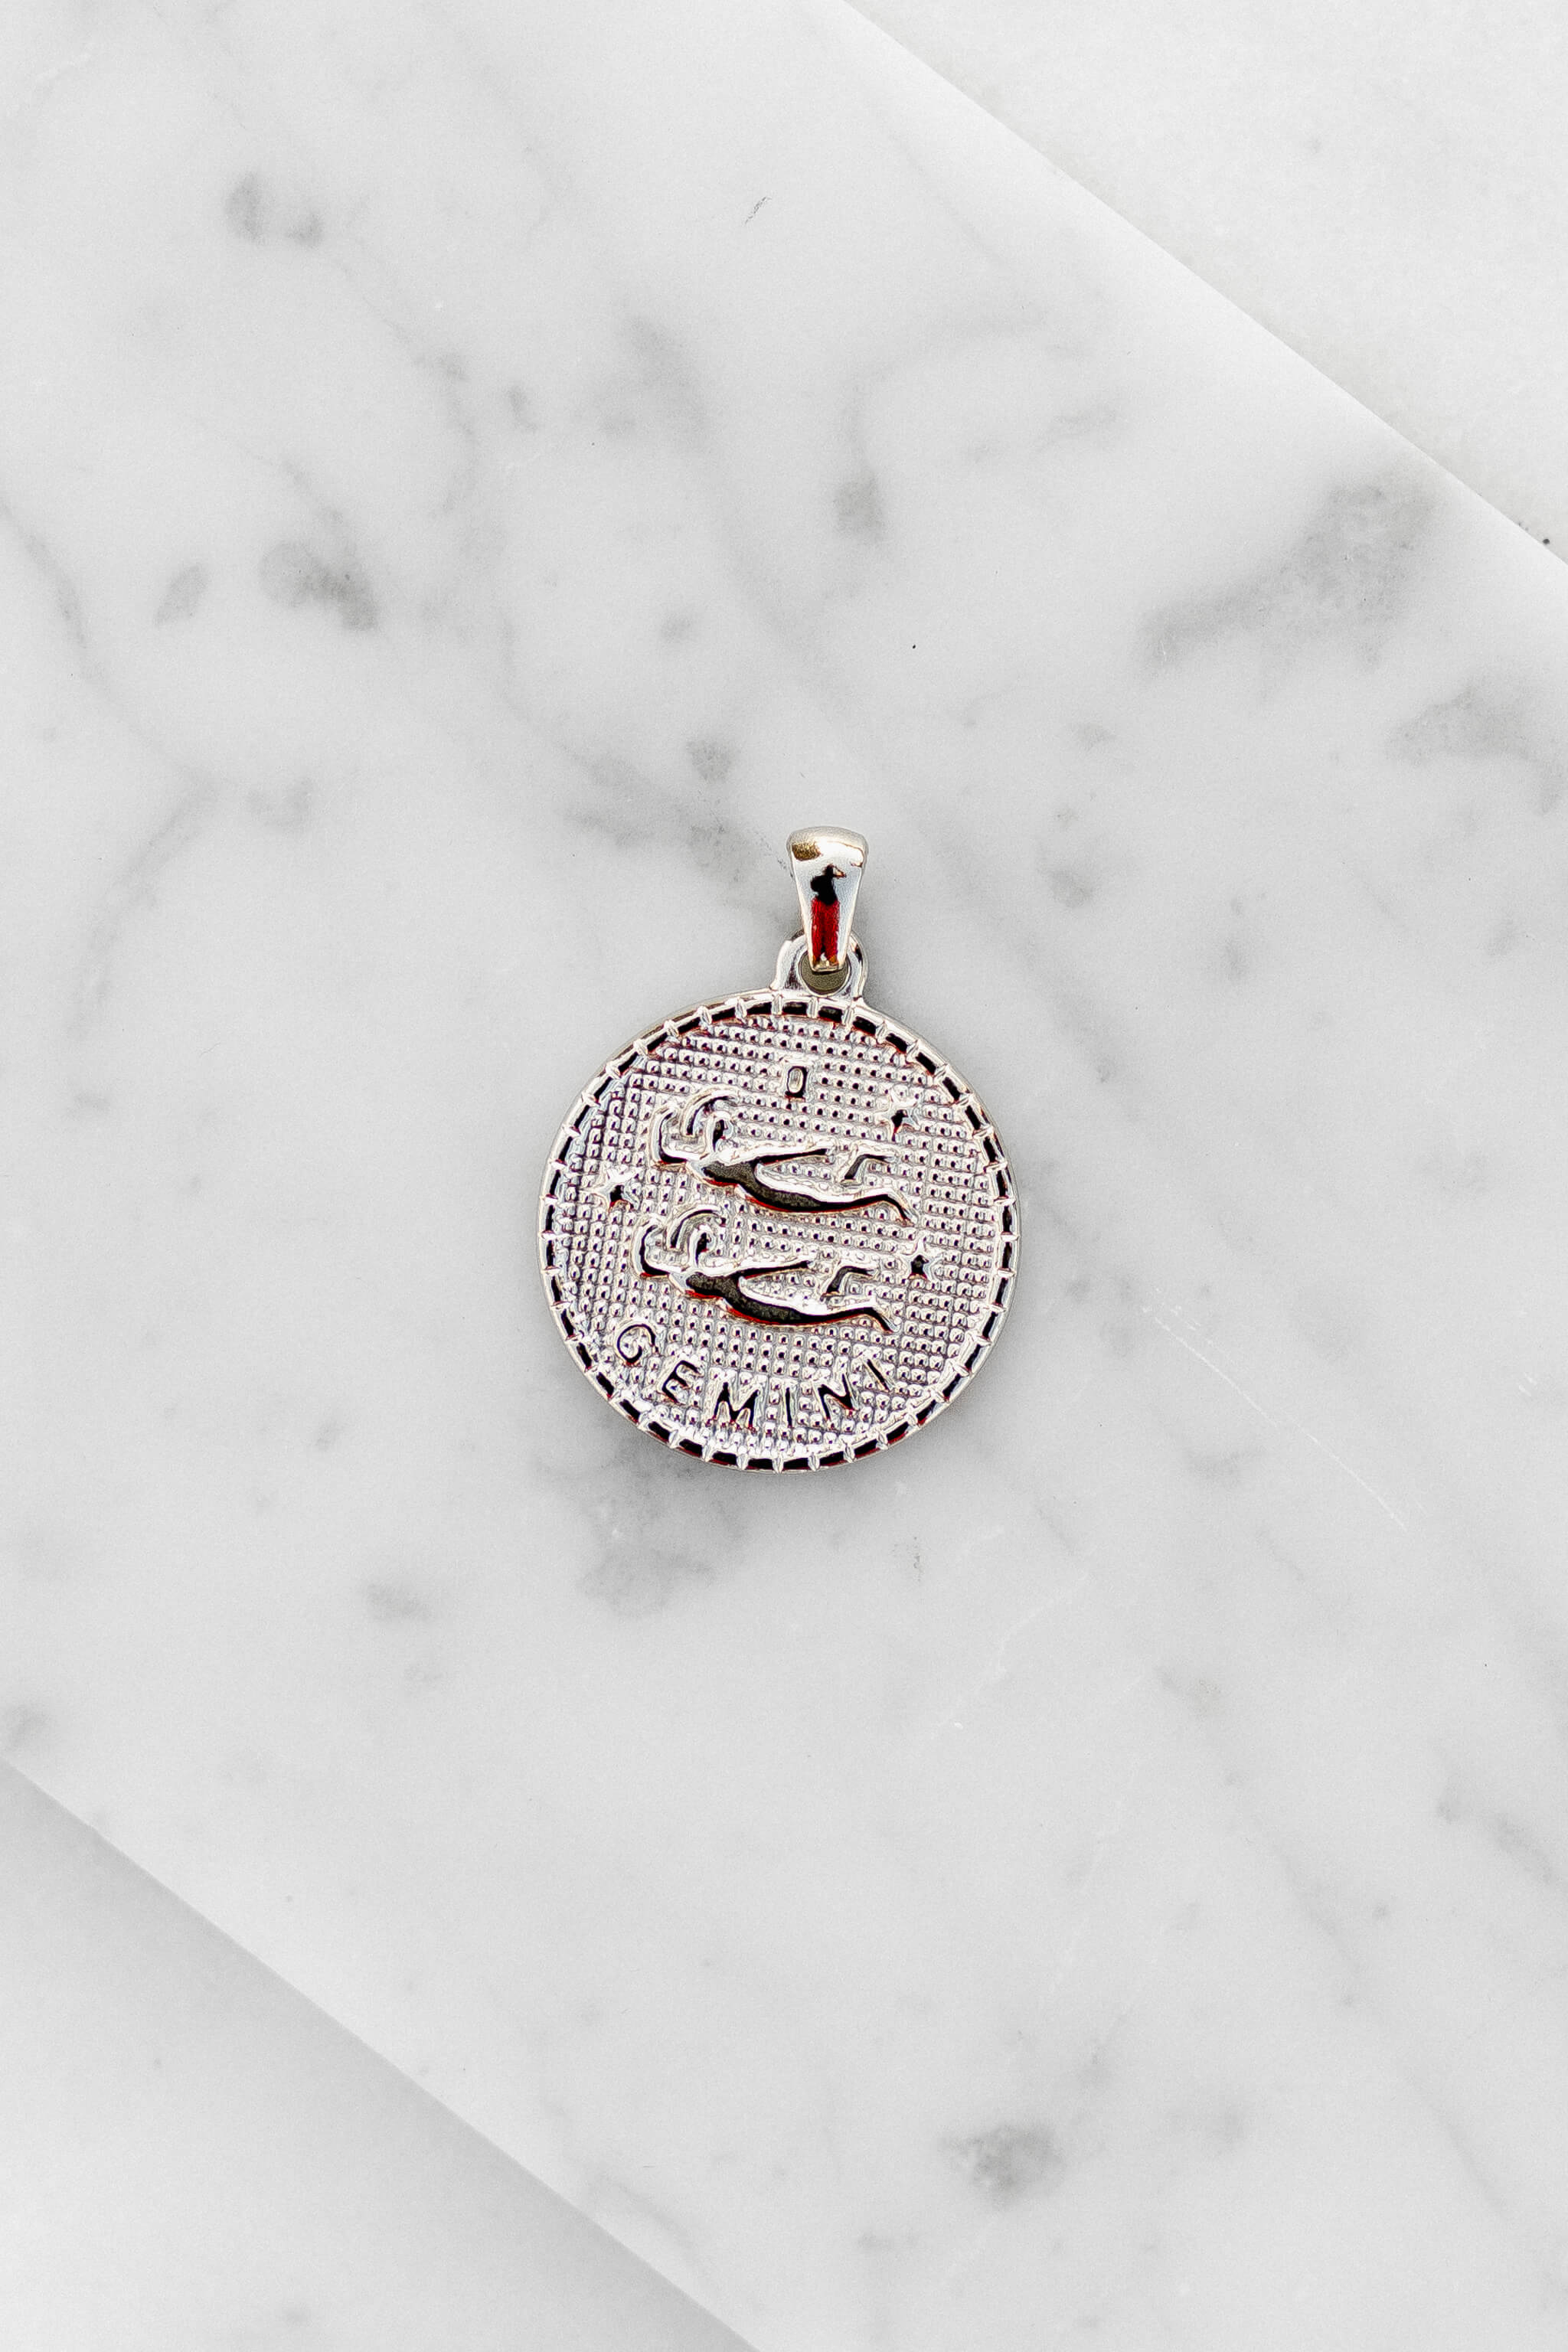 Gemini zodiac sign silver coin charm laying on a white marble